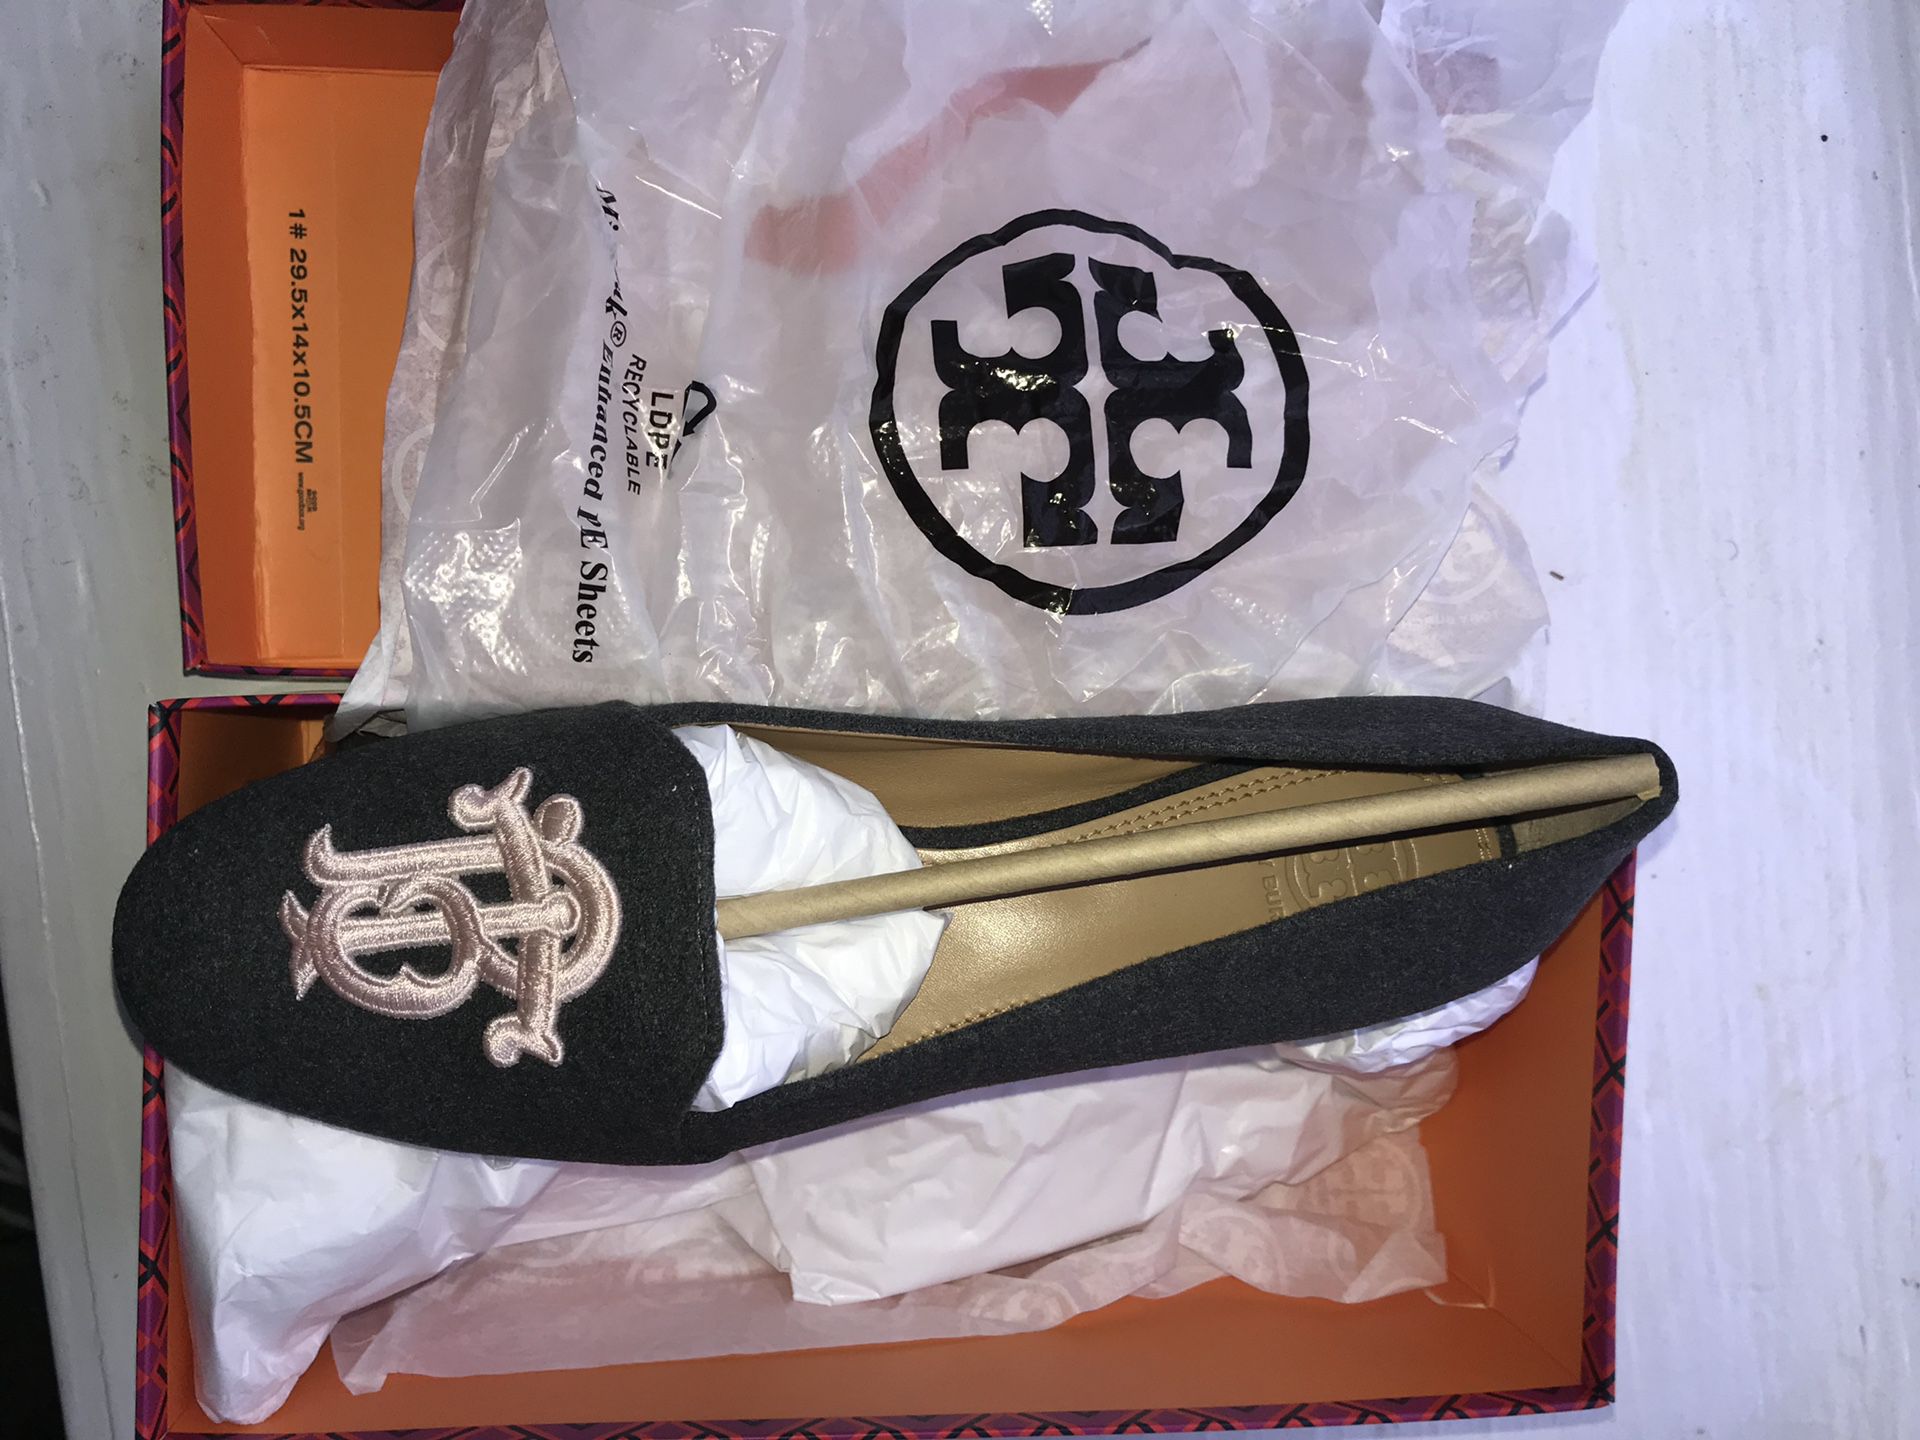 Tory Burch Antonia Loafer Size 8 US for Sale in Atlanta, GA - OfferUp